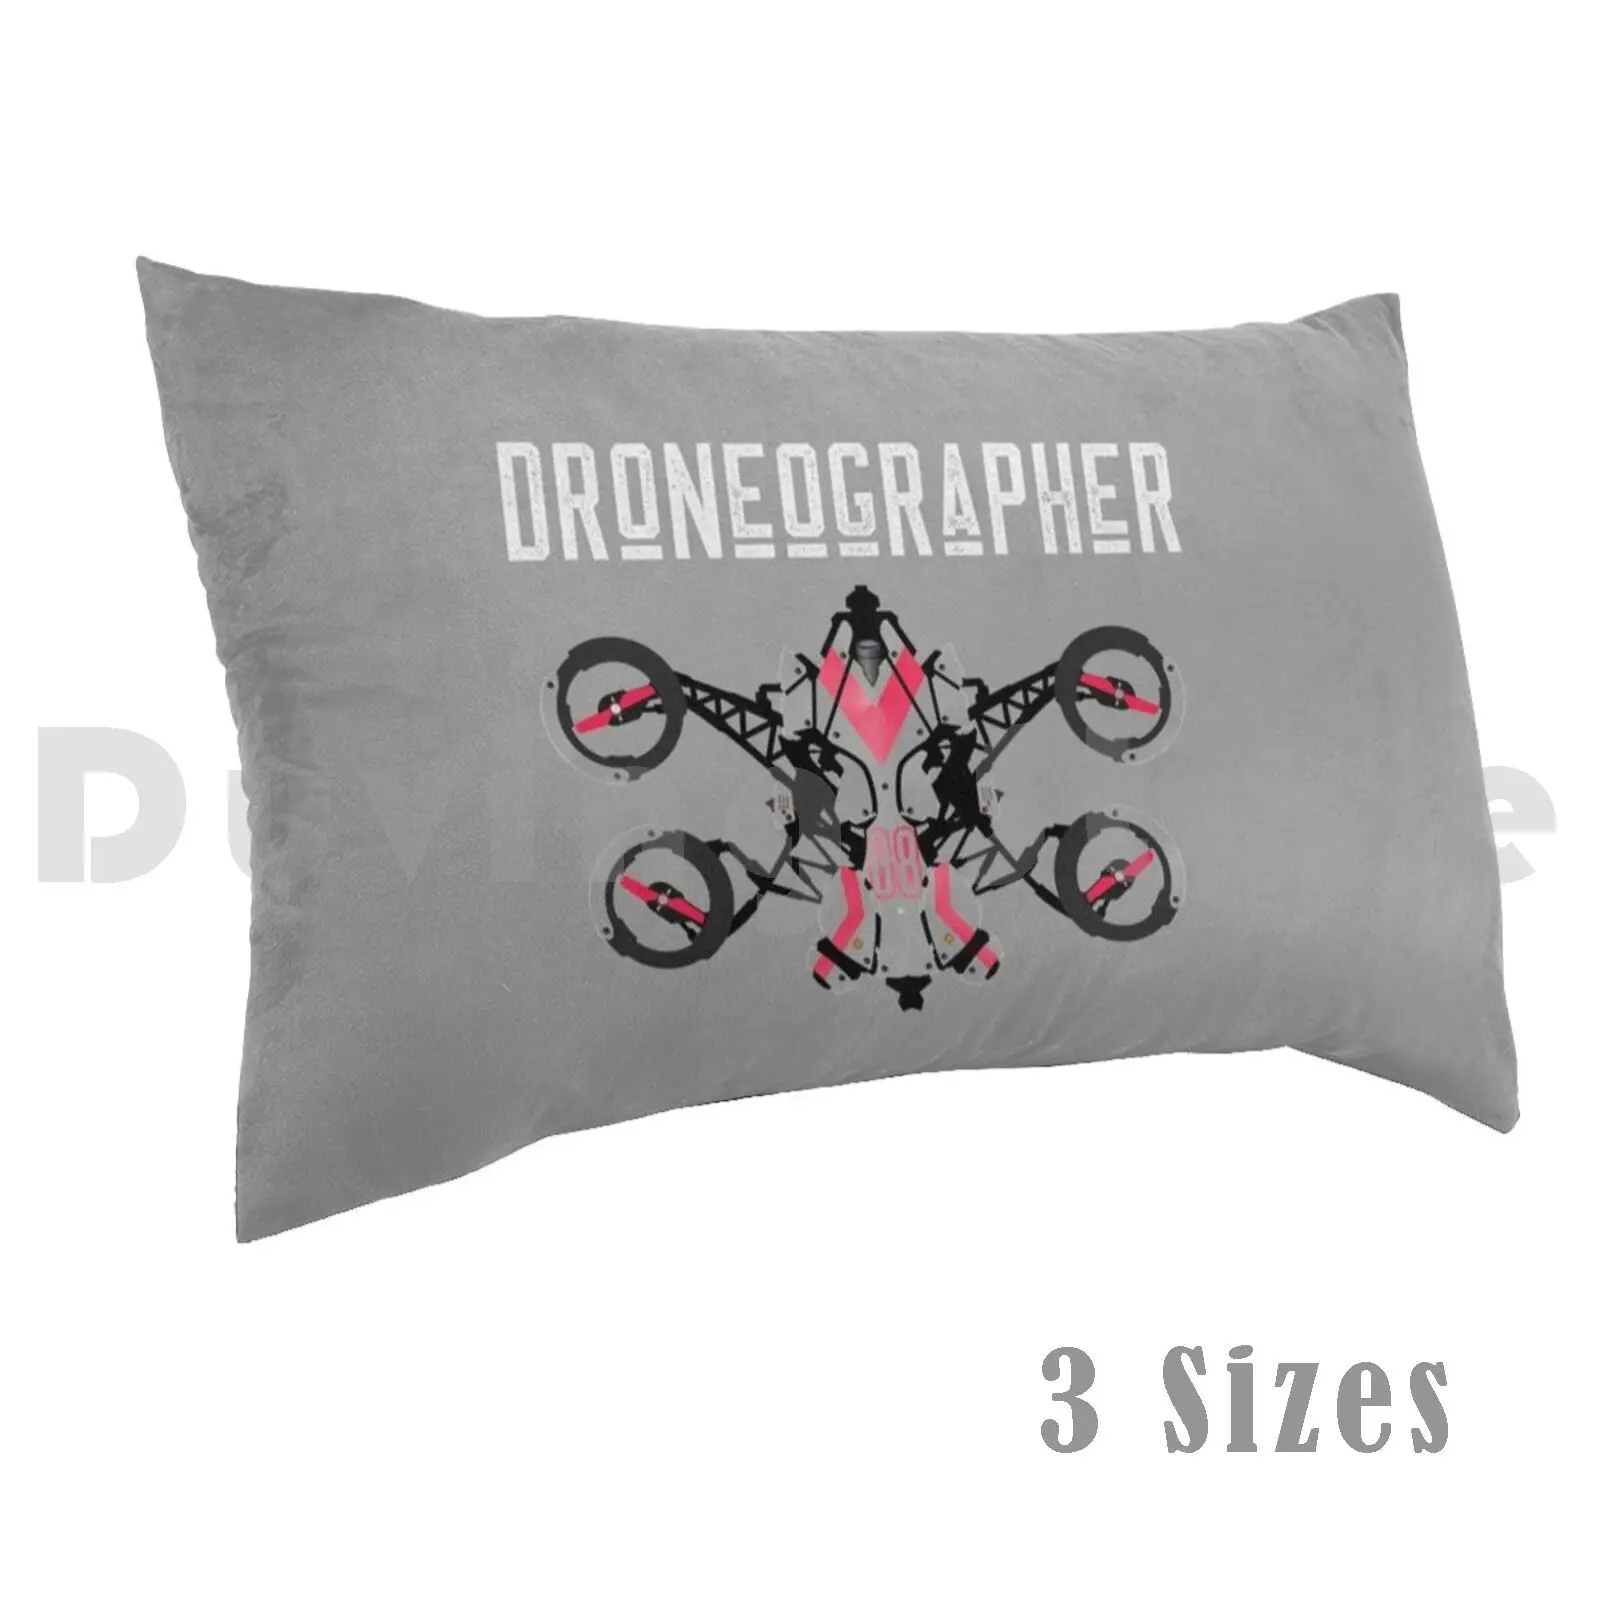 

Droneographer Drone Pilot Pillow Case DIY 50x75 Marksarthole Droneographer Pilot Drone Drone Pilot Dji Flying